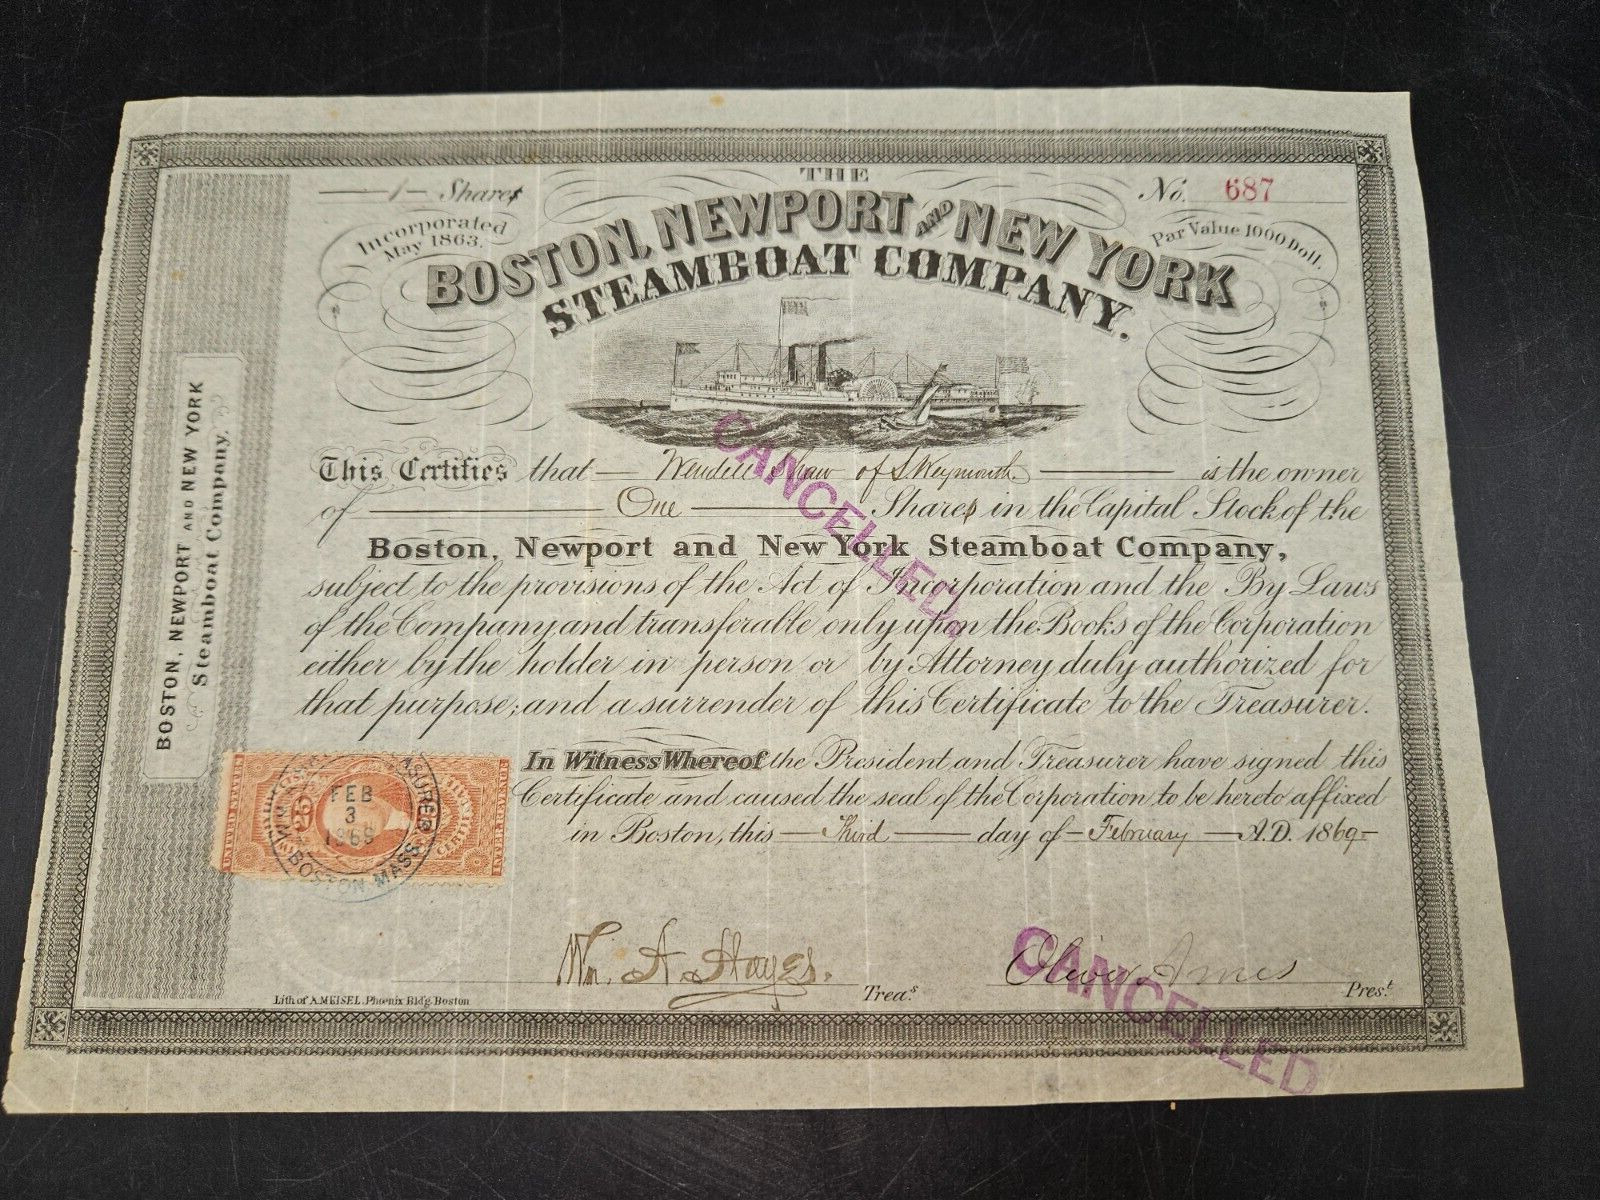 Boston, Newport & New York Steamboat Co. Signed Oliver Ames - Stock 1869